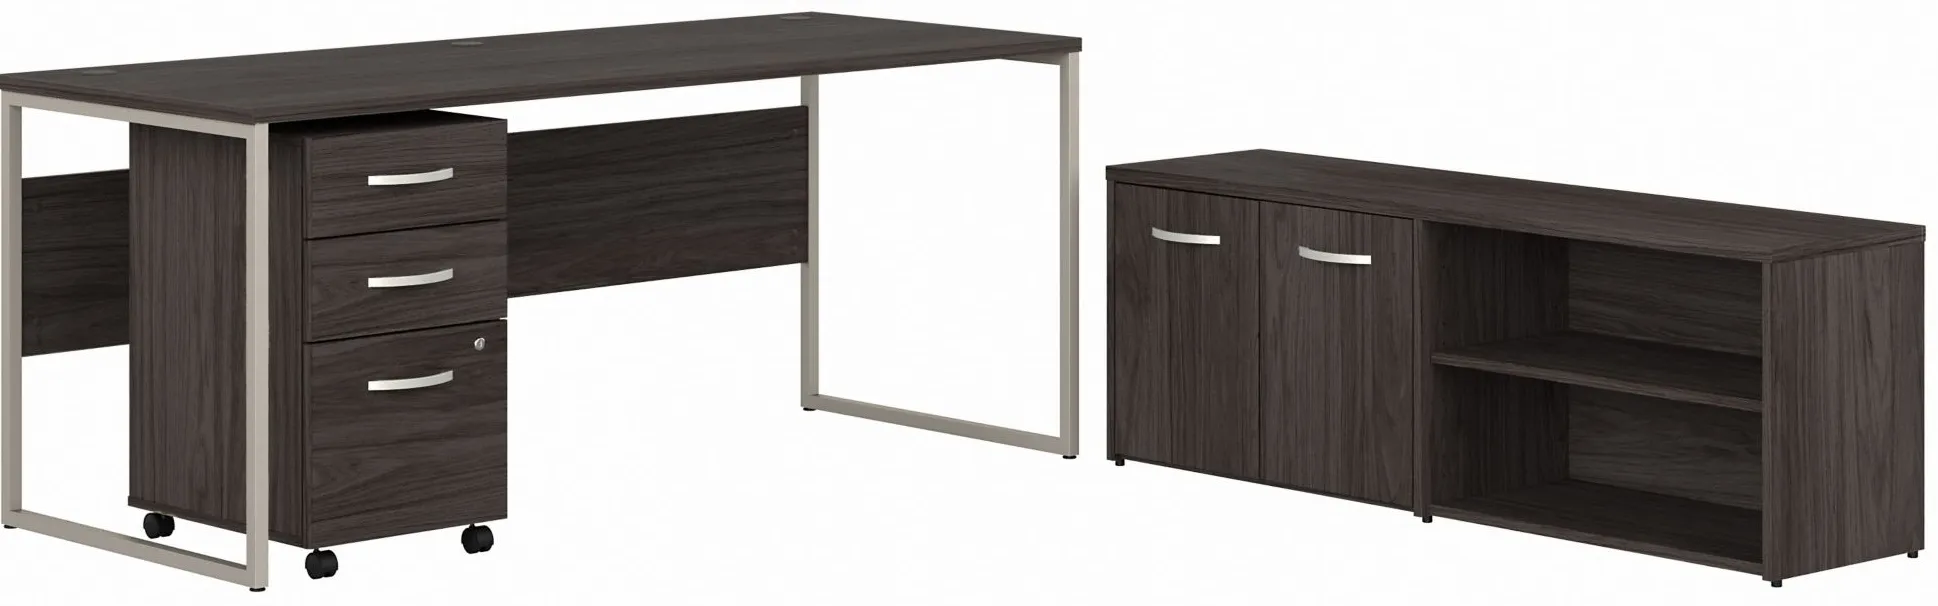 Steinbeck Workstation Desk w/ Credenza and File Cabinet in Storm Gray by Bush Industries